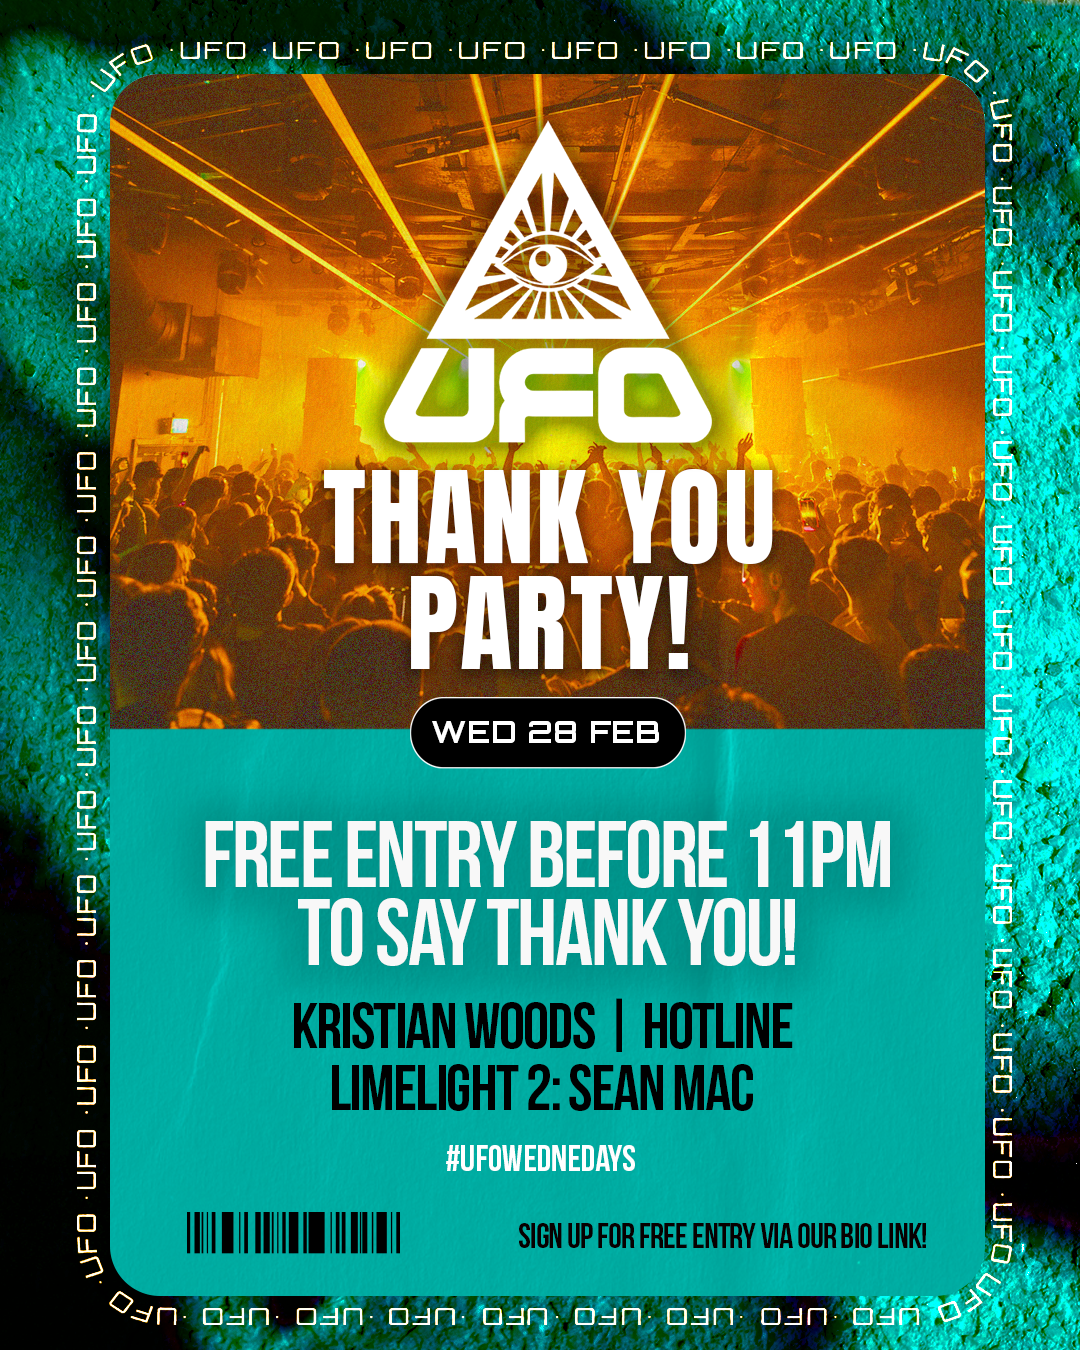 UFO - THANK YOU PARTY - Página frontal